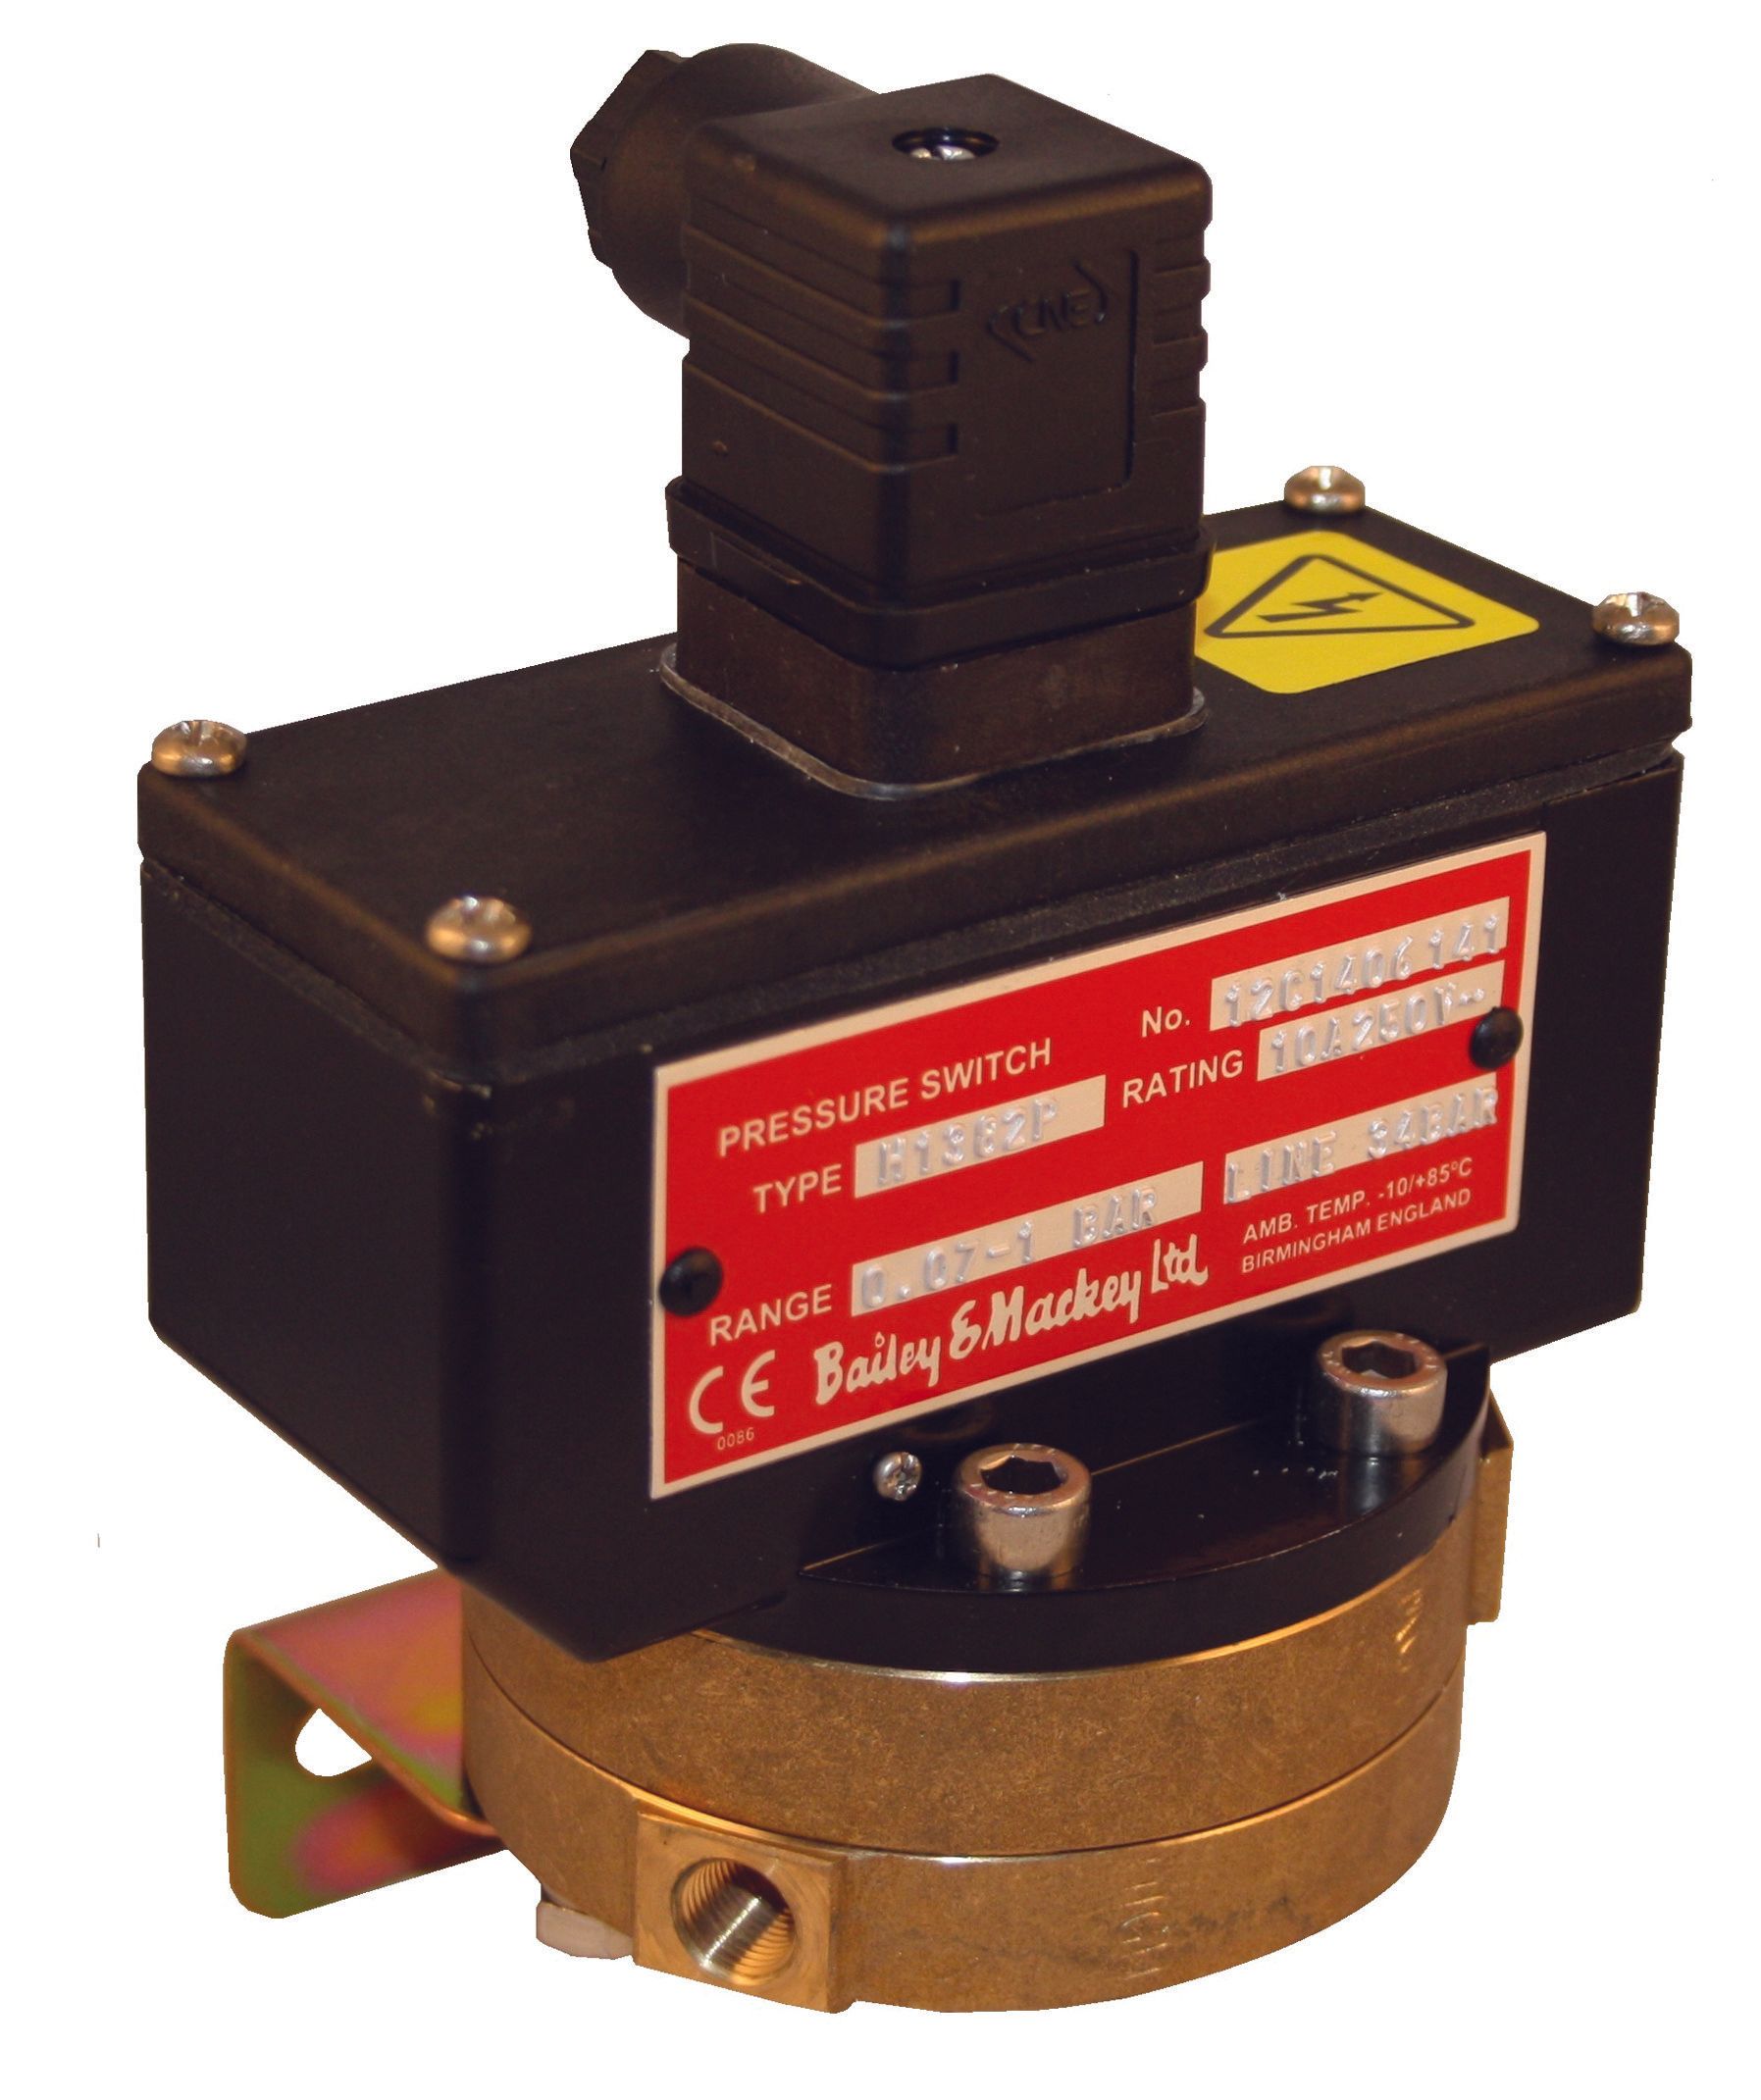 WATER DIFFERENTIAL PRESSURE SWITCH (MULTIPLE RANGES)